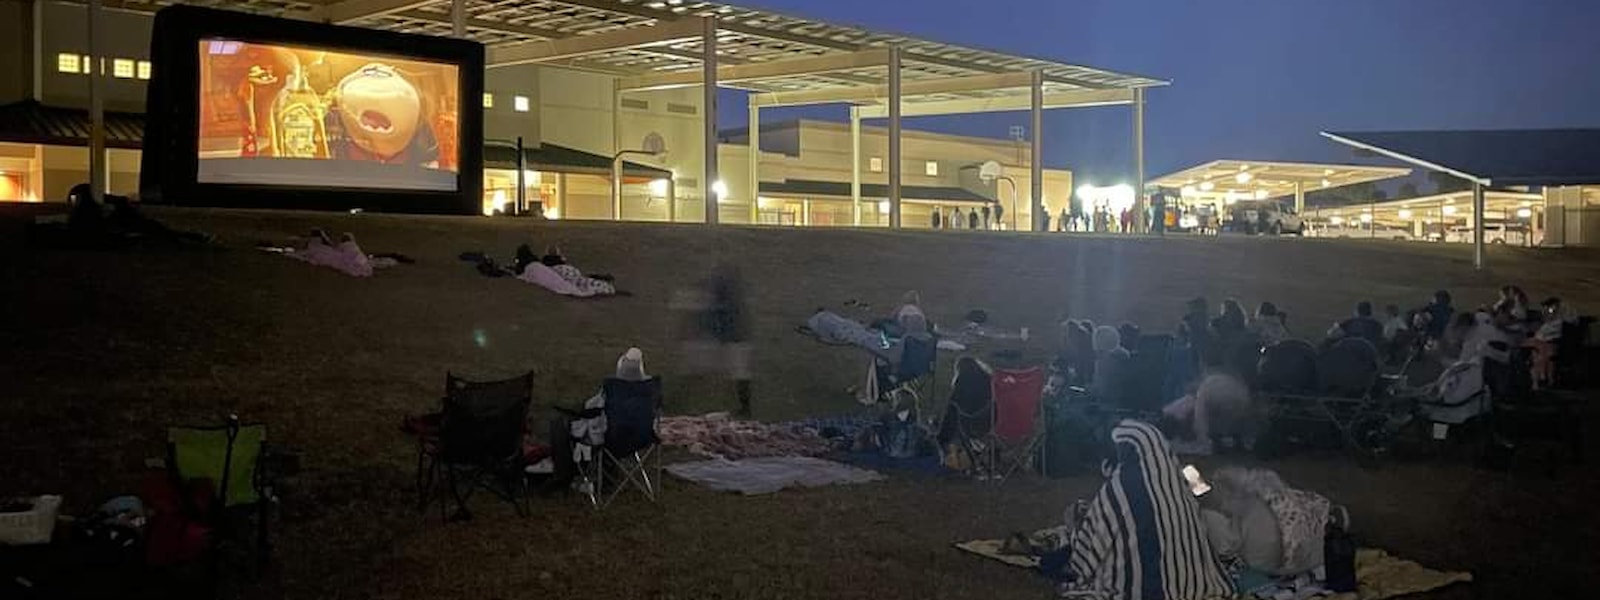 families sitting on the lawn watching a movie